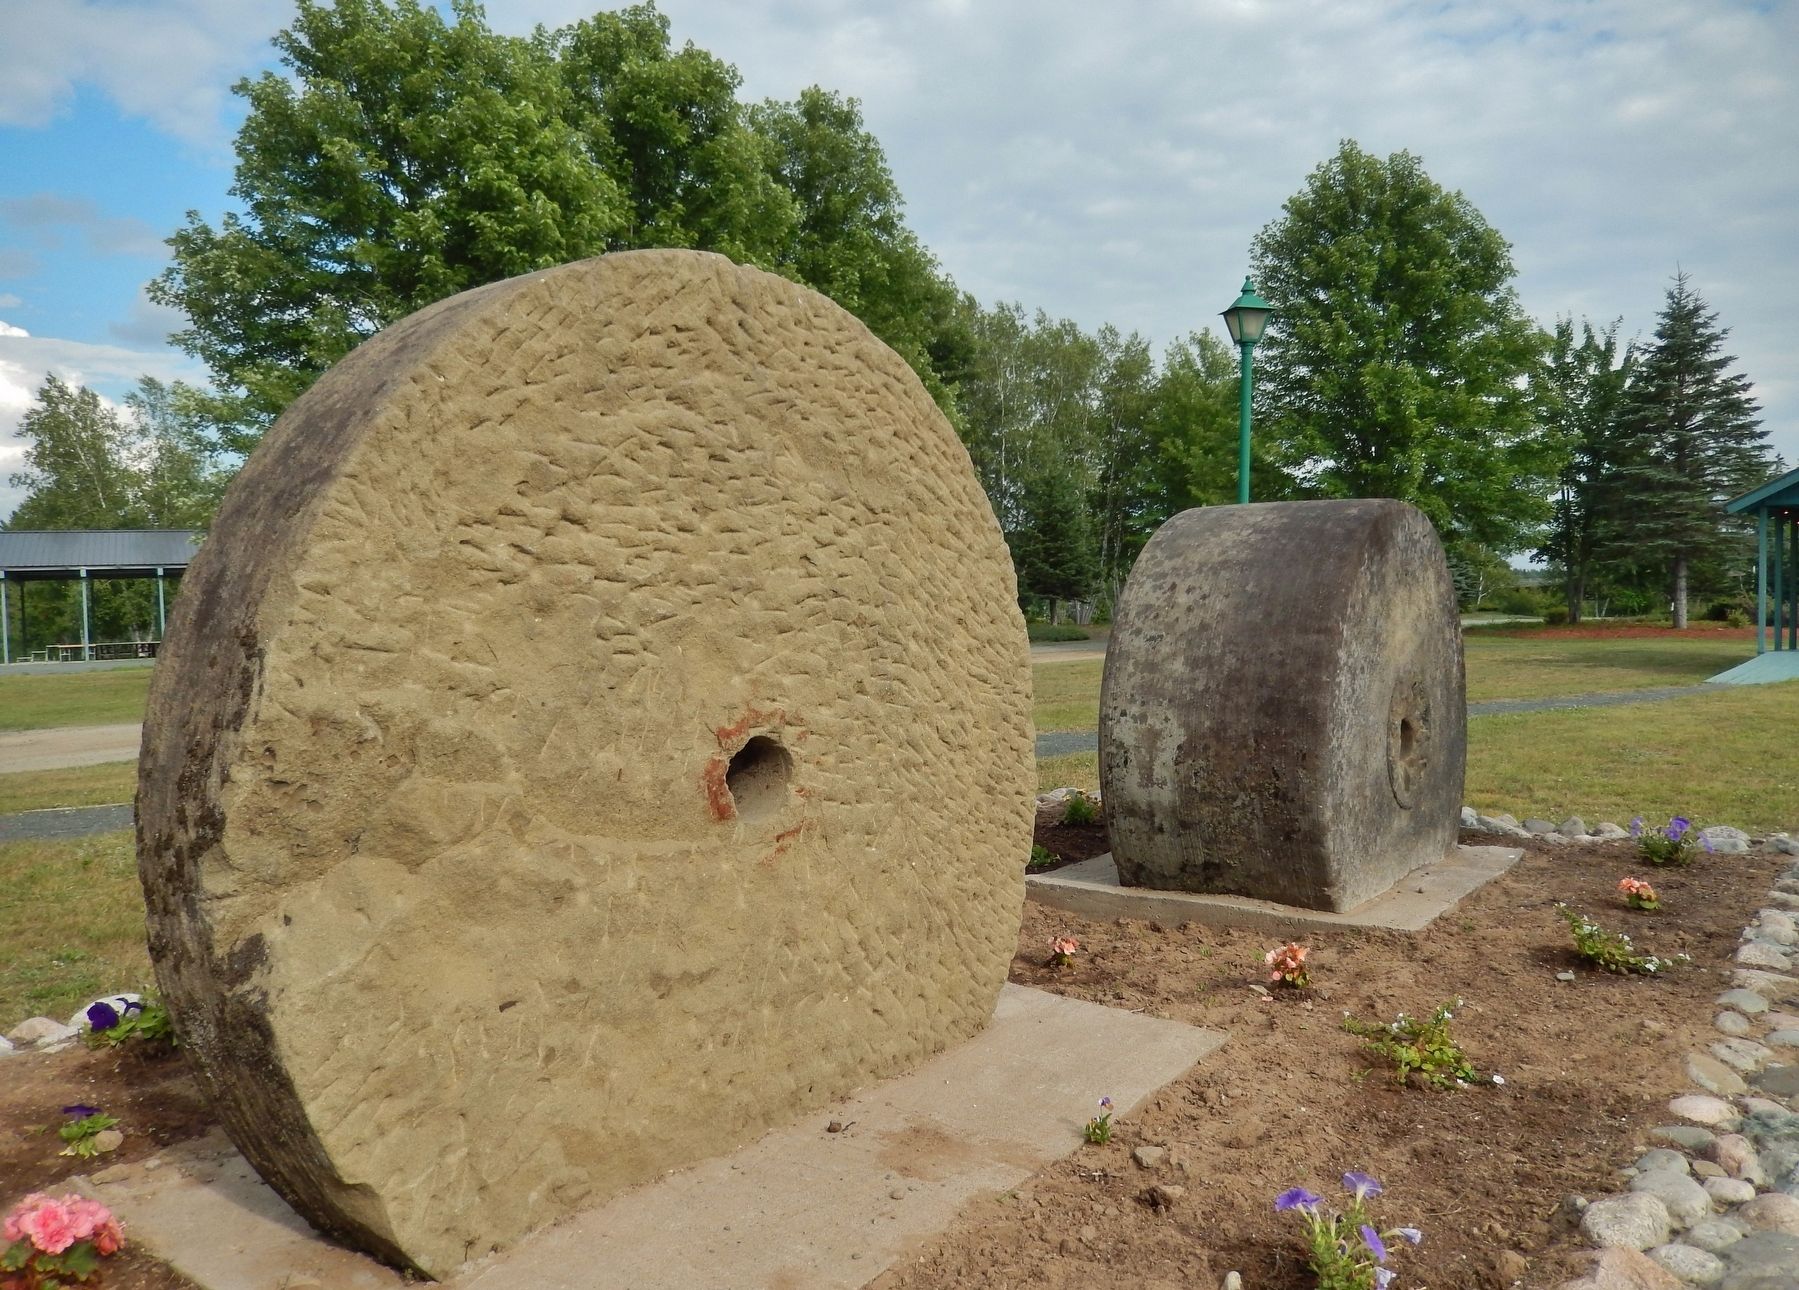 Millstones (<i>side view showing scoring and relative width</i>) image. Click for full size.